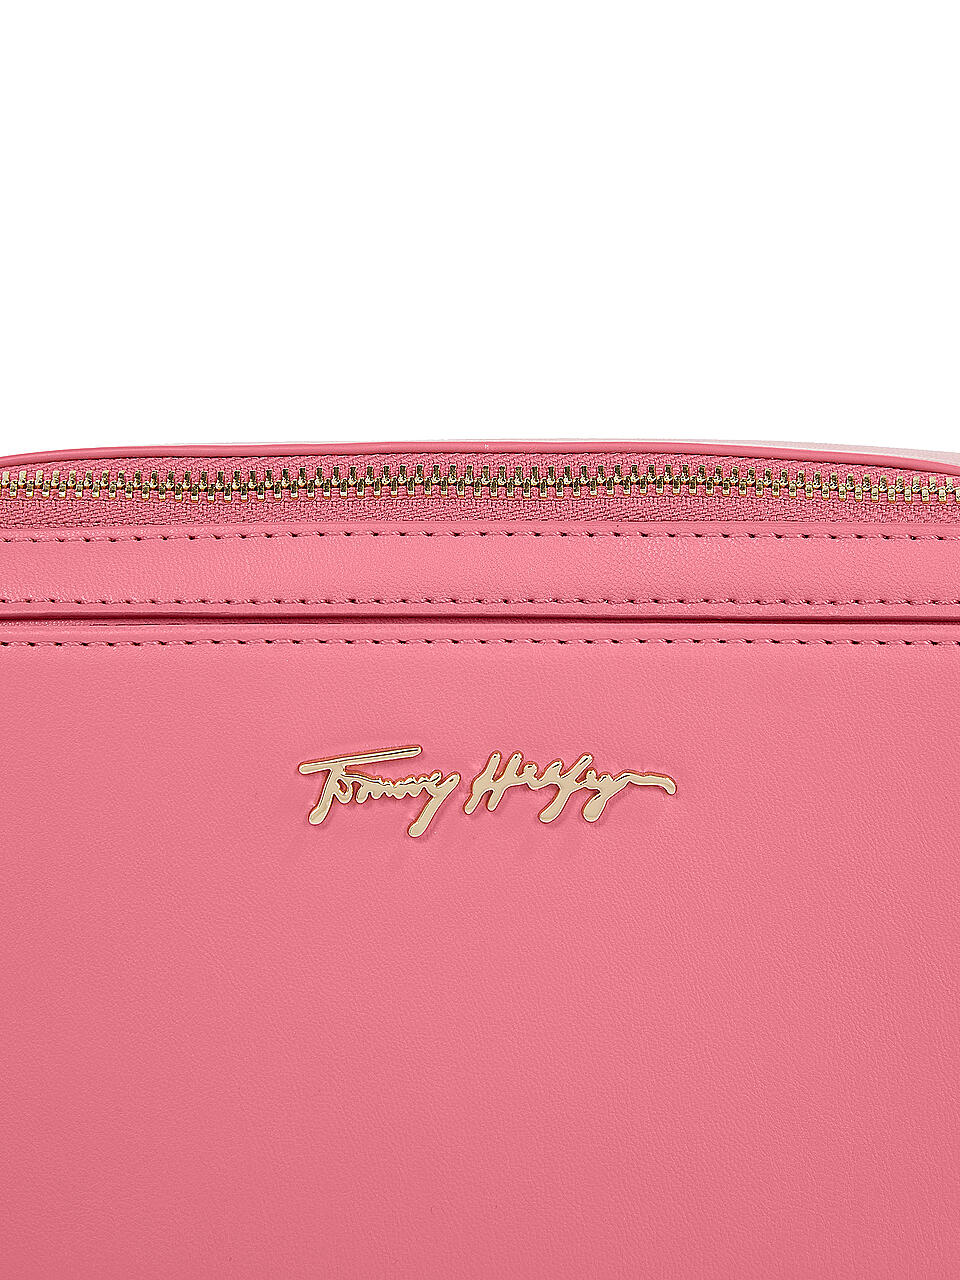 TOMMY HILFIGER | Tasche - Mini Bag ICONIC | pink